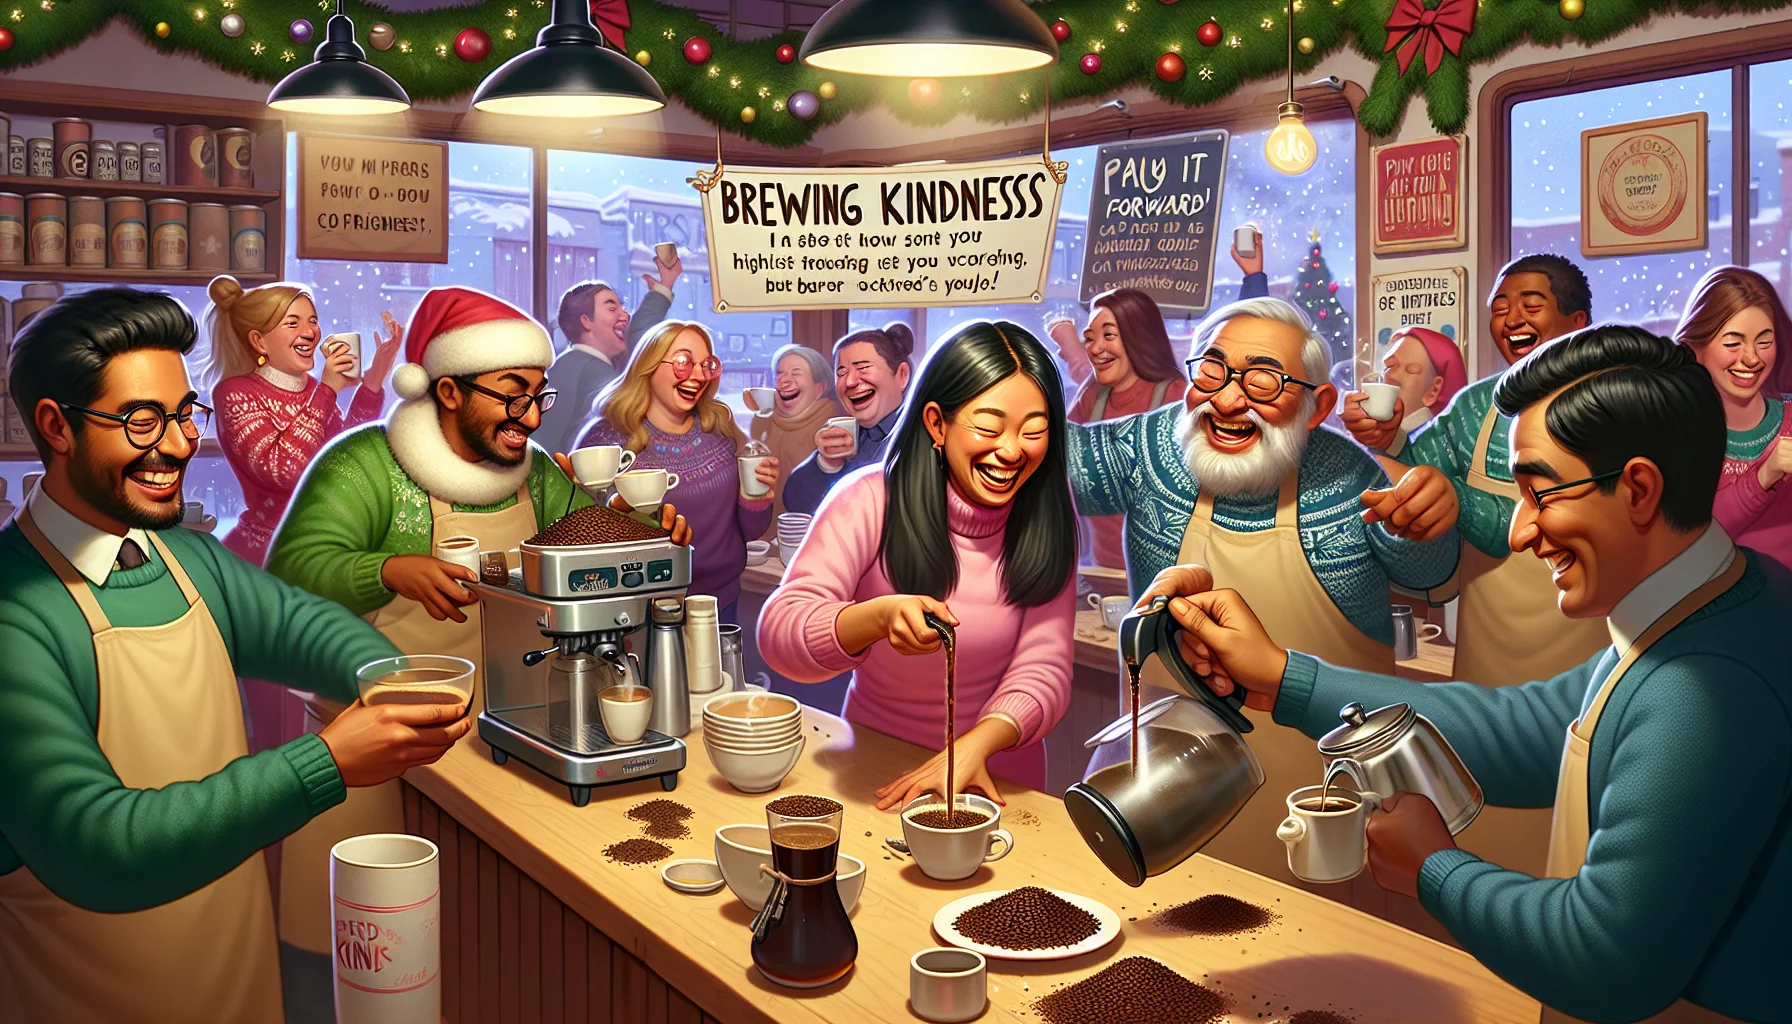 Imagine a humorous scene unfolding in a bustling coffee and tea shop during Christmas season. Patrons are happily engaged in a 'Pay It Forward' initiative titled 'Brewing Kindness'. A South Asian woman is carefully pouring hot water over coffee grounds, while a Caucasian man is intricately preparing a tea infusion. Christmas decorations are adding to the festive mood. People are laughing and exchanging gifts and there is a communal feeling of celebration and joy. Signboards around the cafe exude messages about 'Brewing Kindness'. The playful atmosphere is heightened by the holiday spirit and the aroma of brewing coffee and tea.